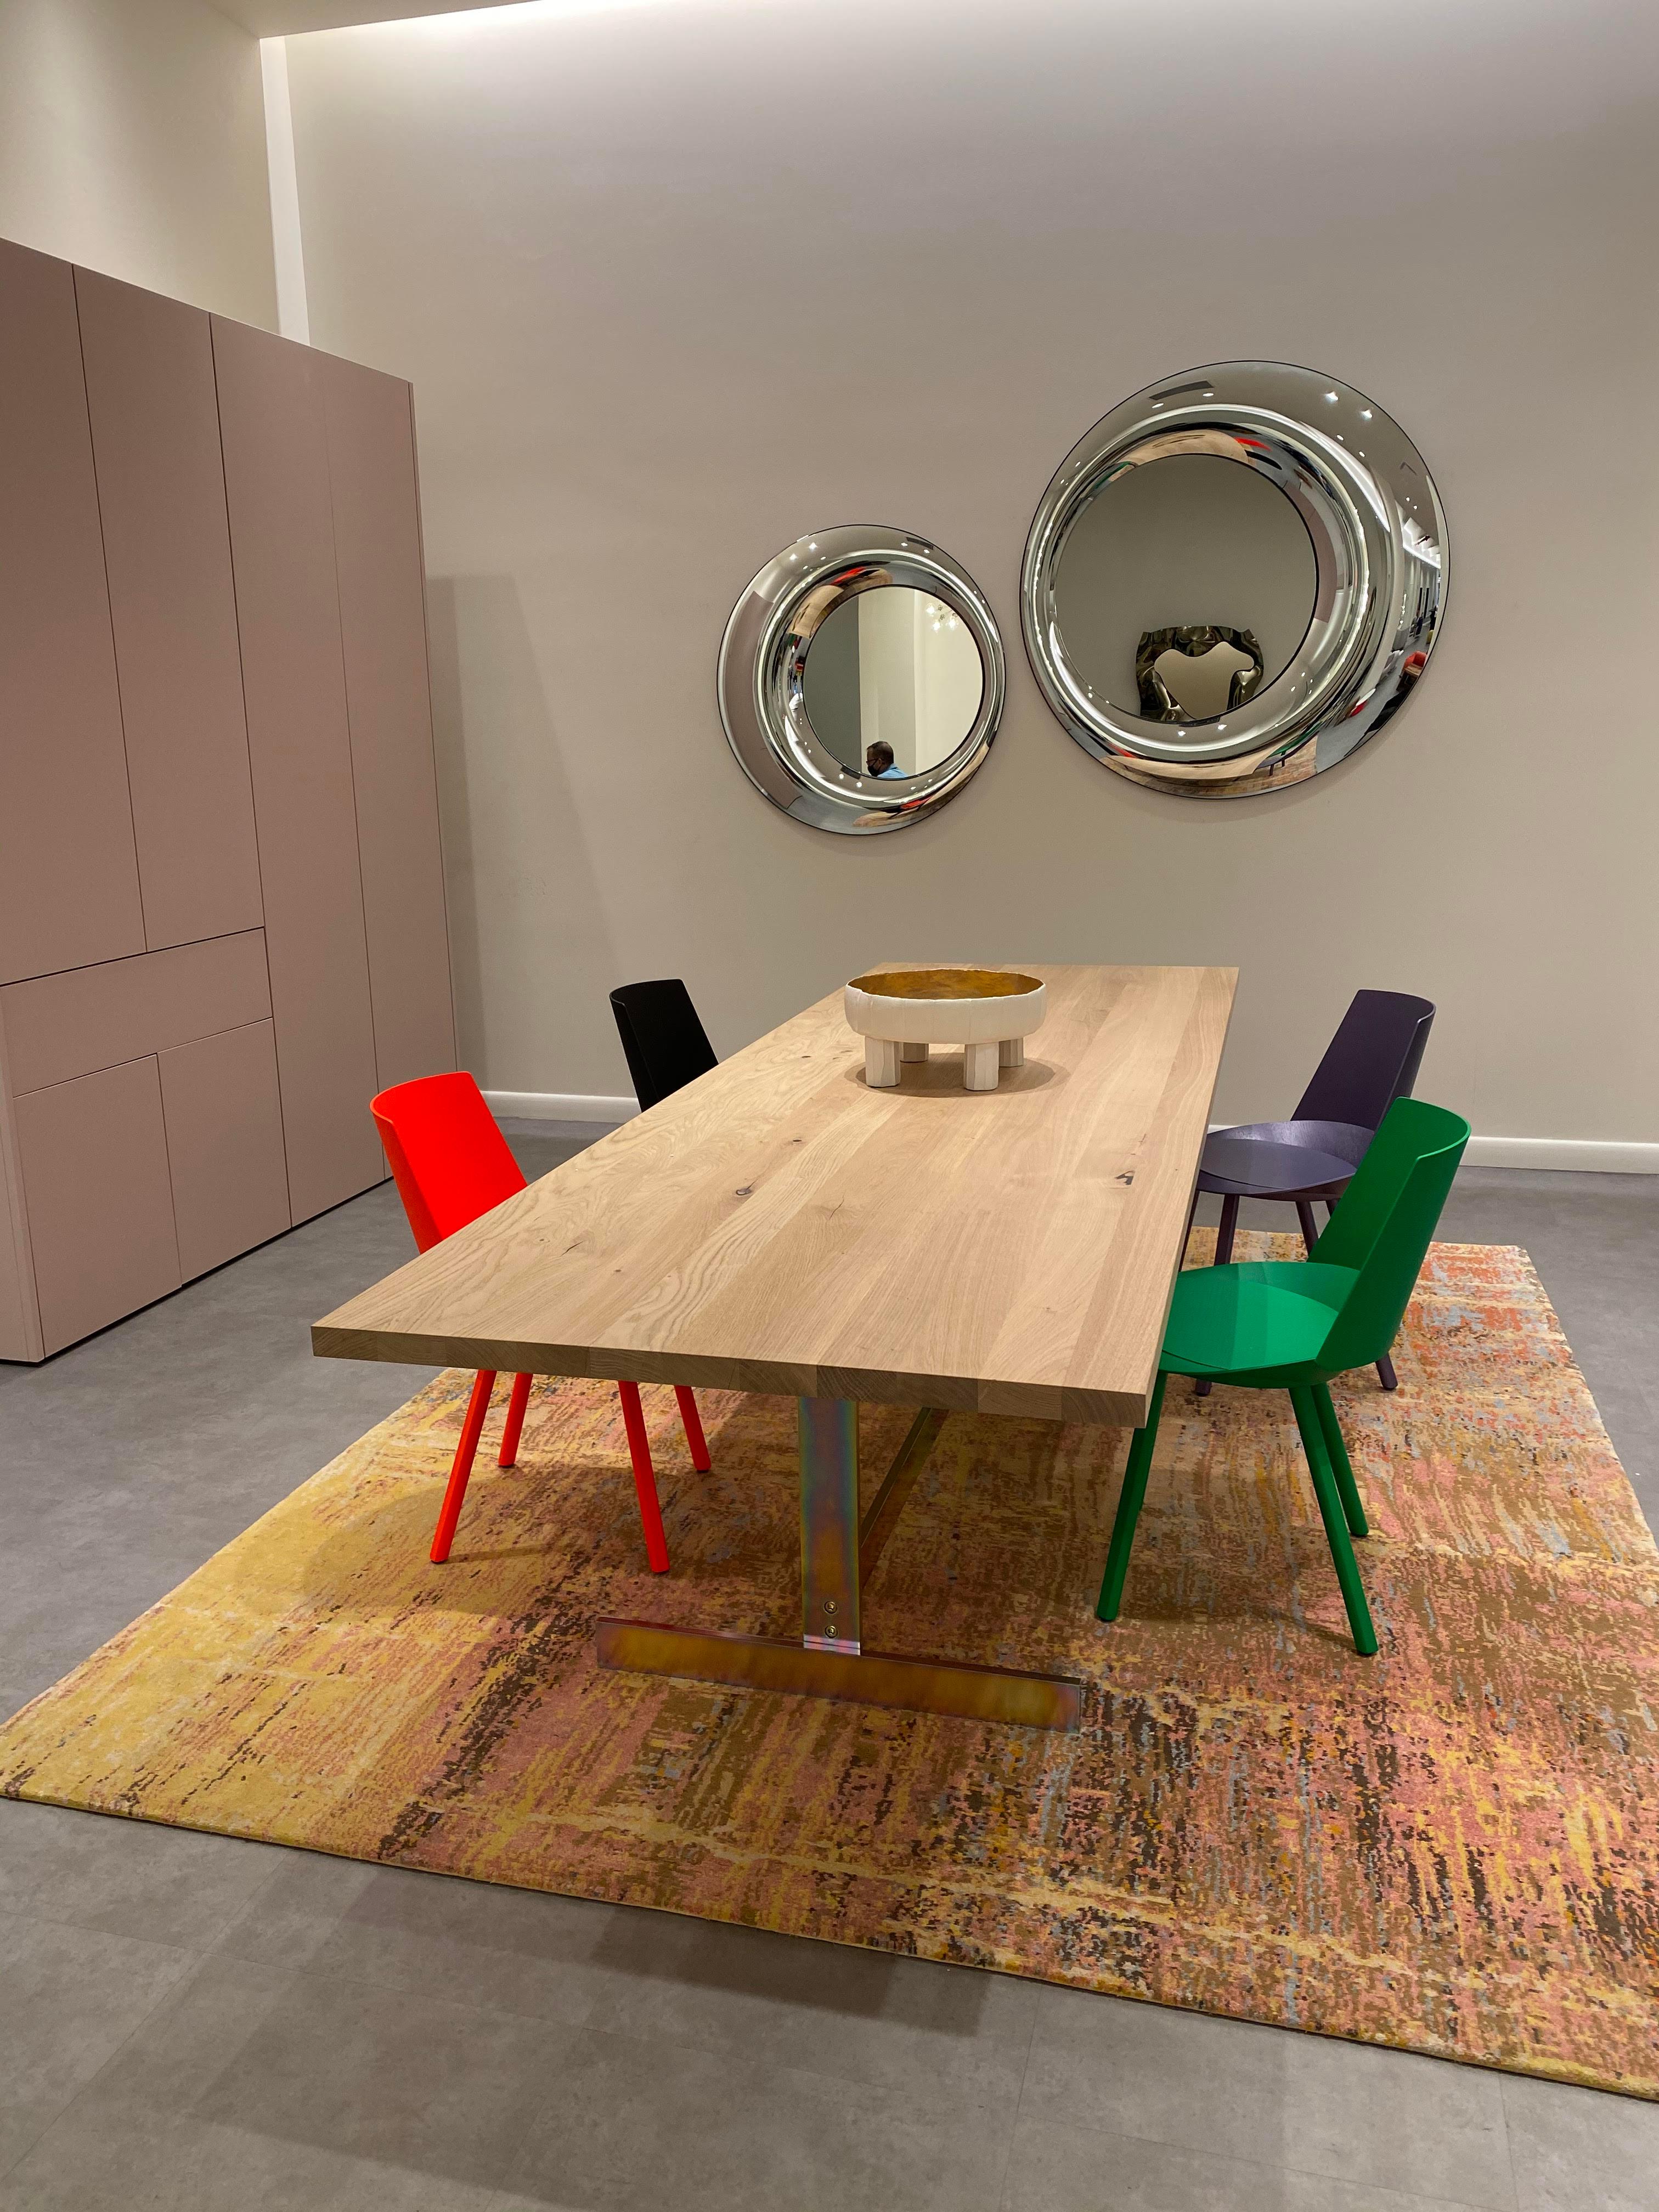 HOUDINI, custom made side chair, Oak Veneer, stained, lacquered,
E15 celebrates ten years of chair Houdini by Stefan Diez with a curated palette of anniversary colors. In his search for an ergonomic, organic seating shell without involving